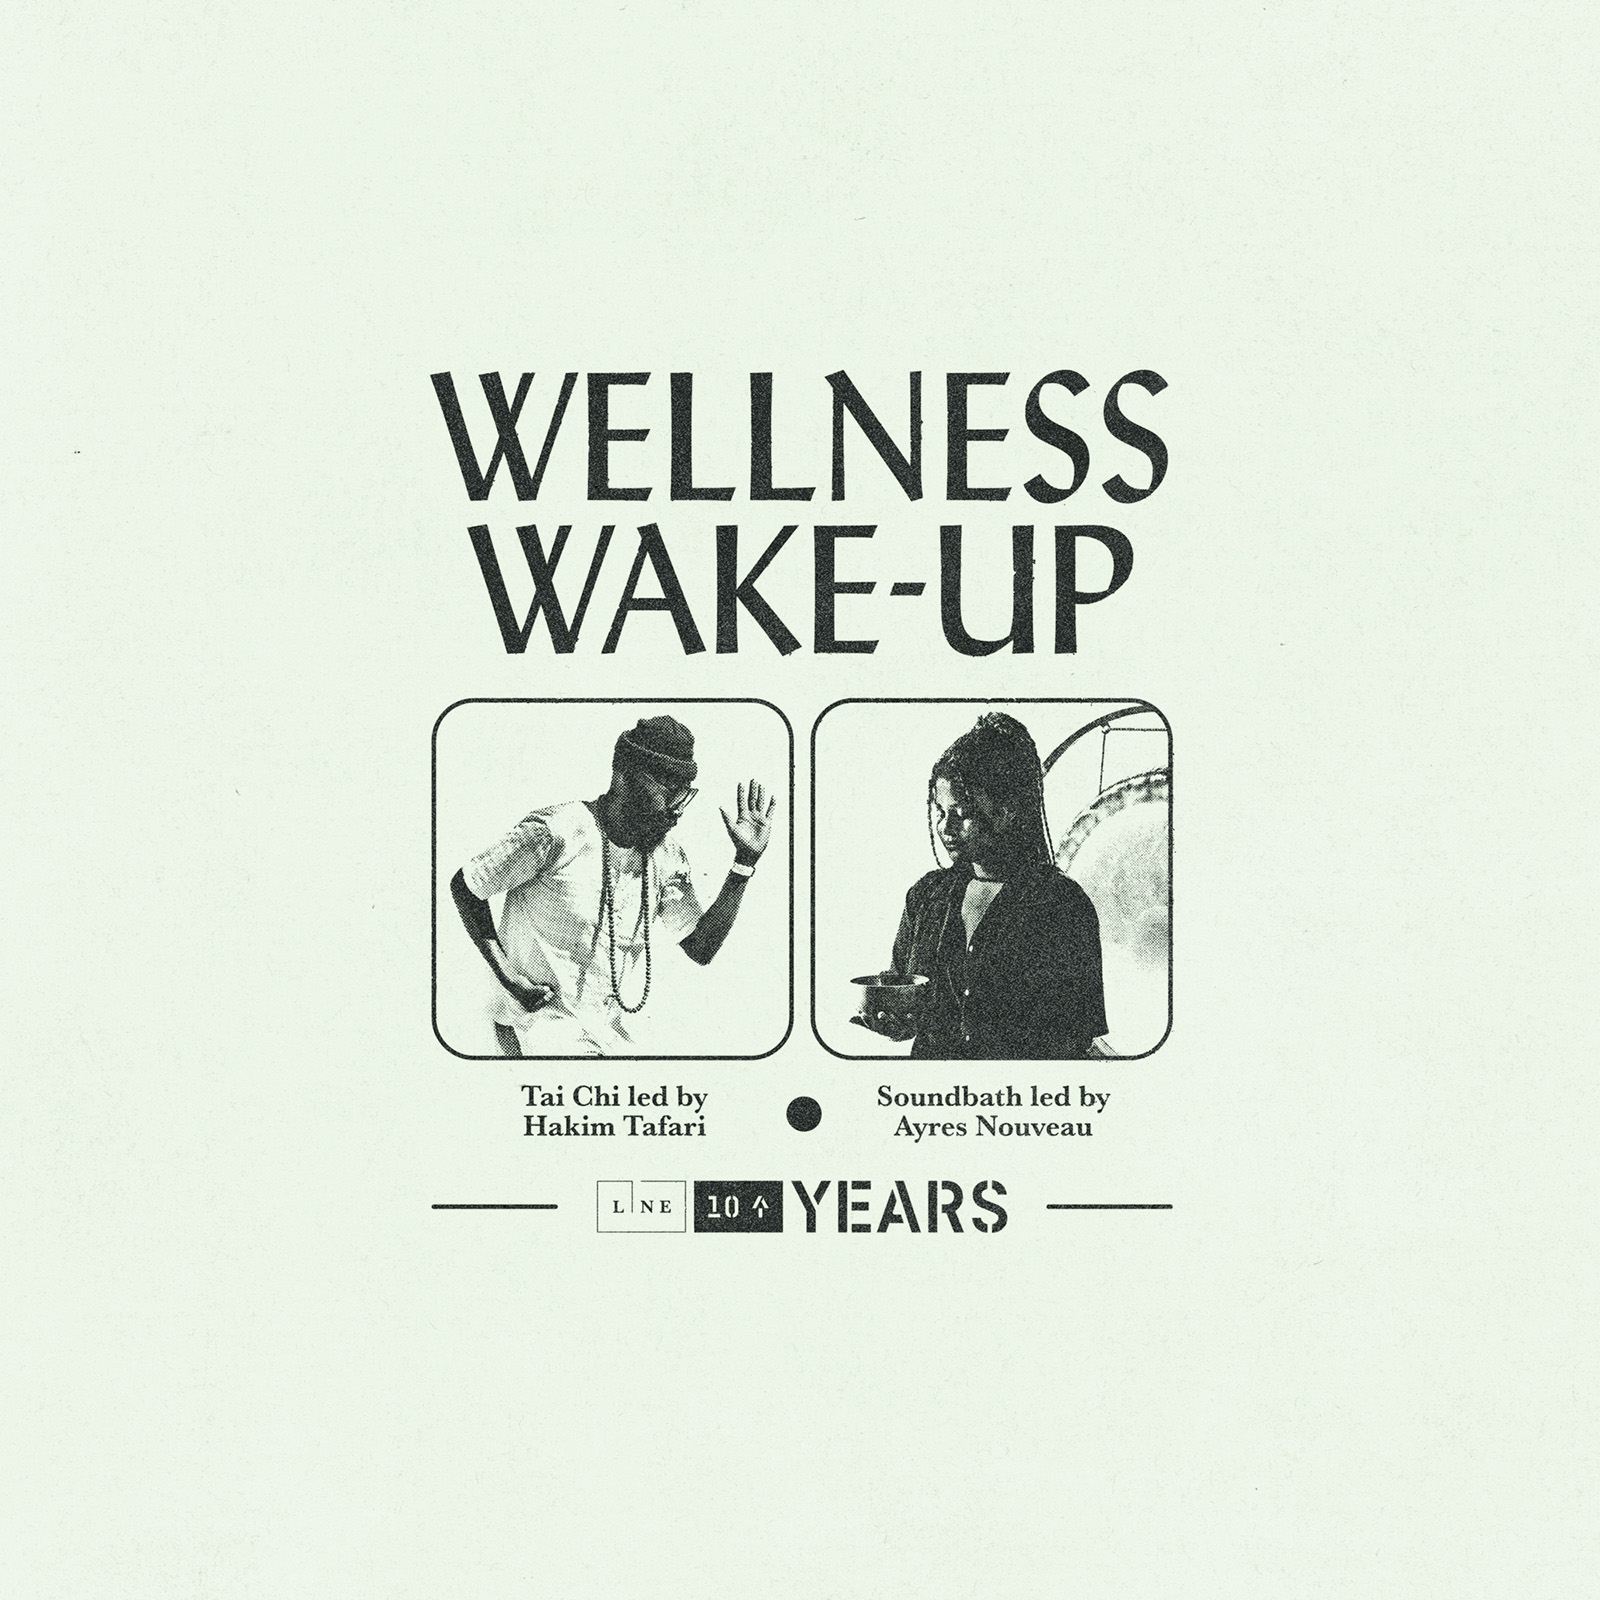 A mint poster to Wellness Wake-Up